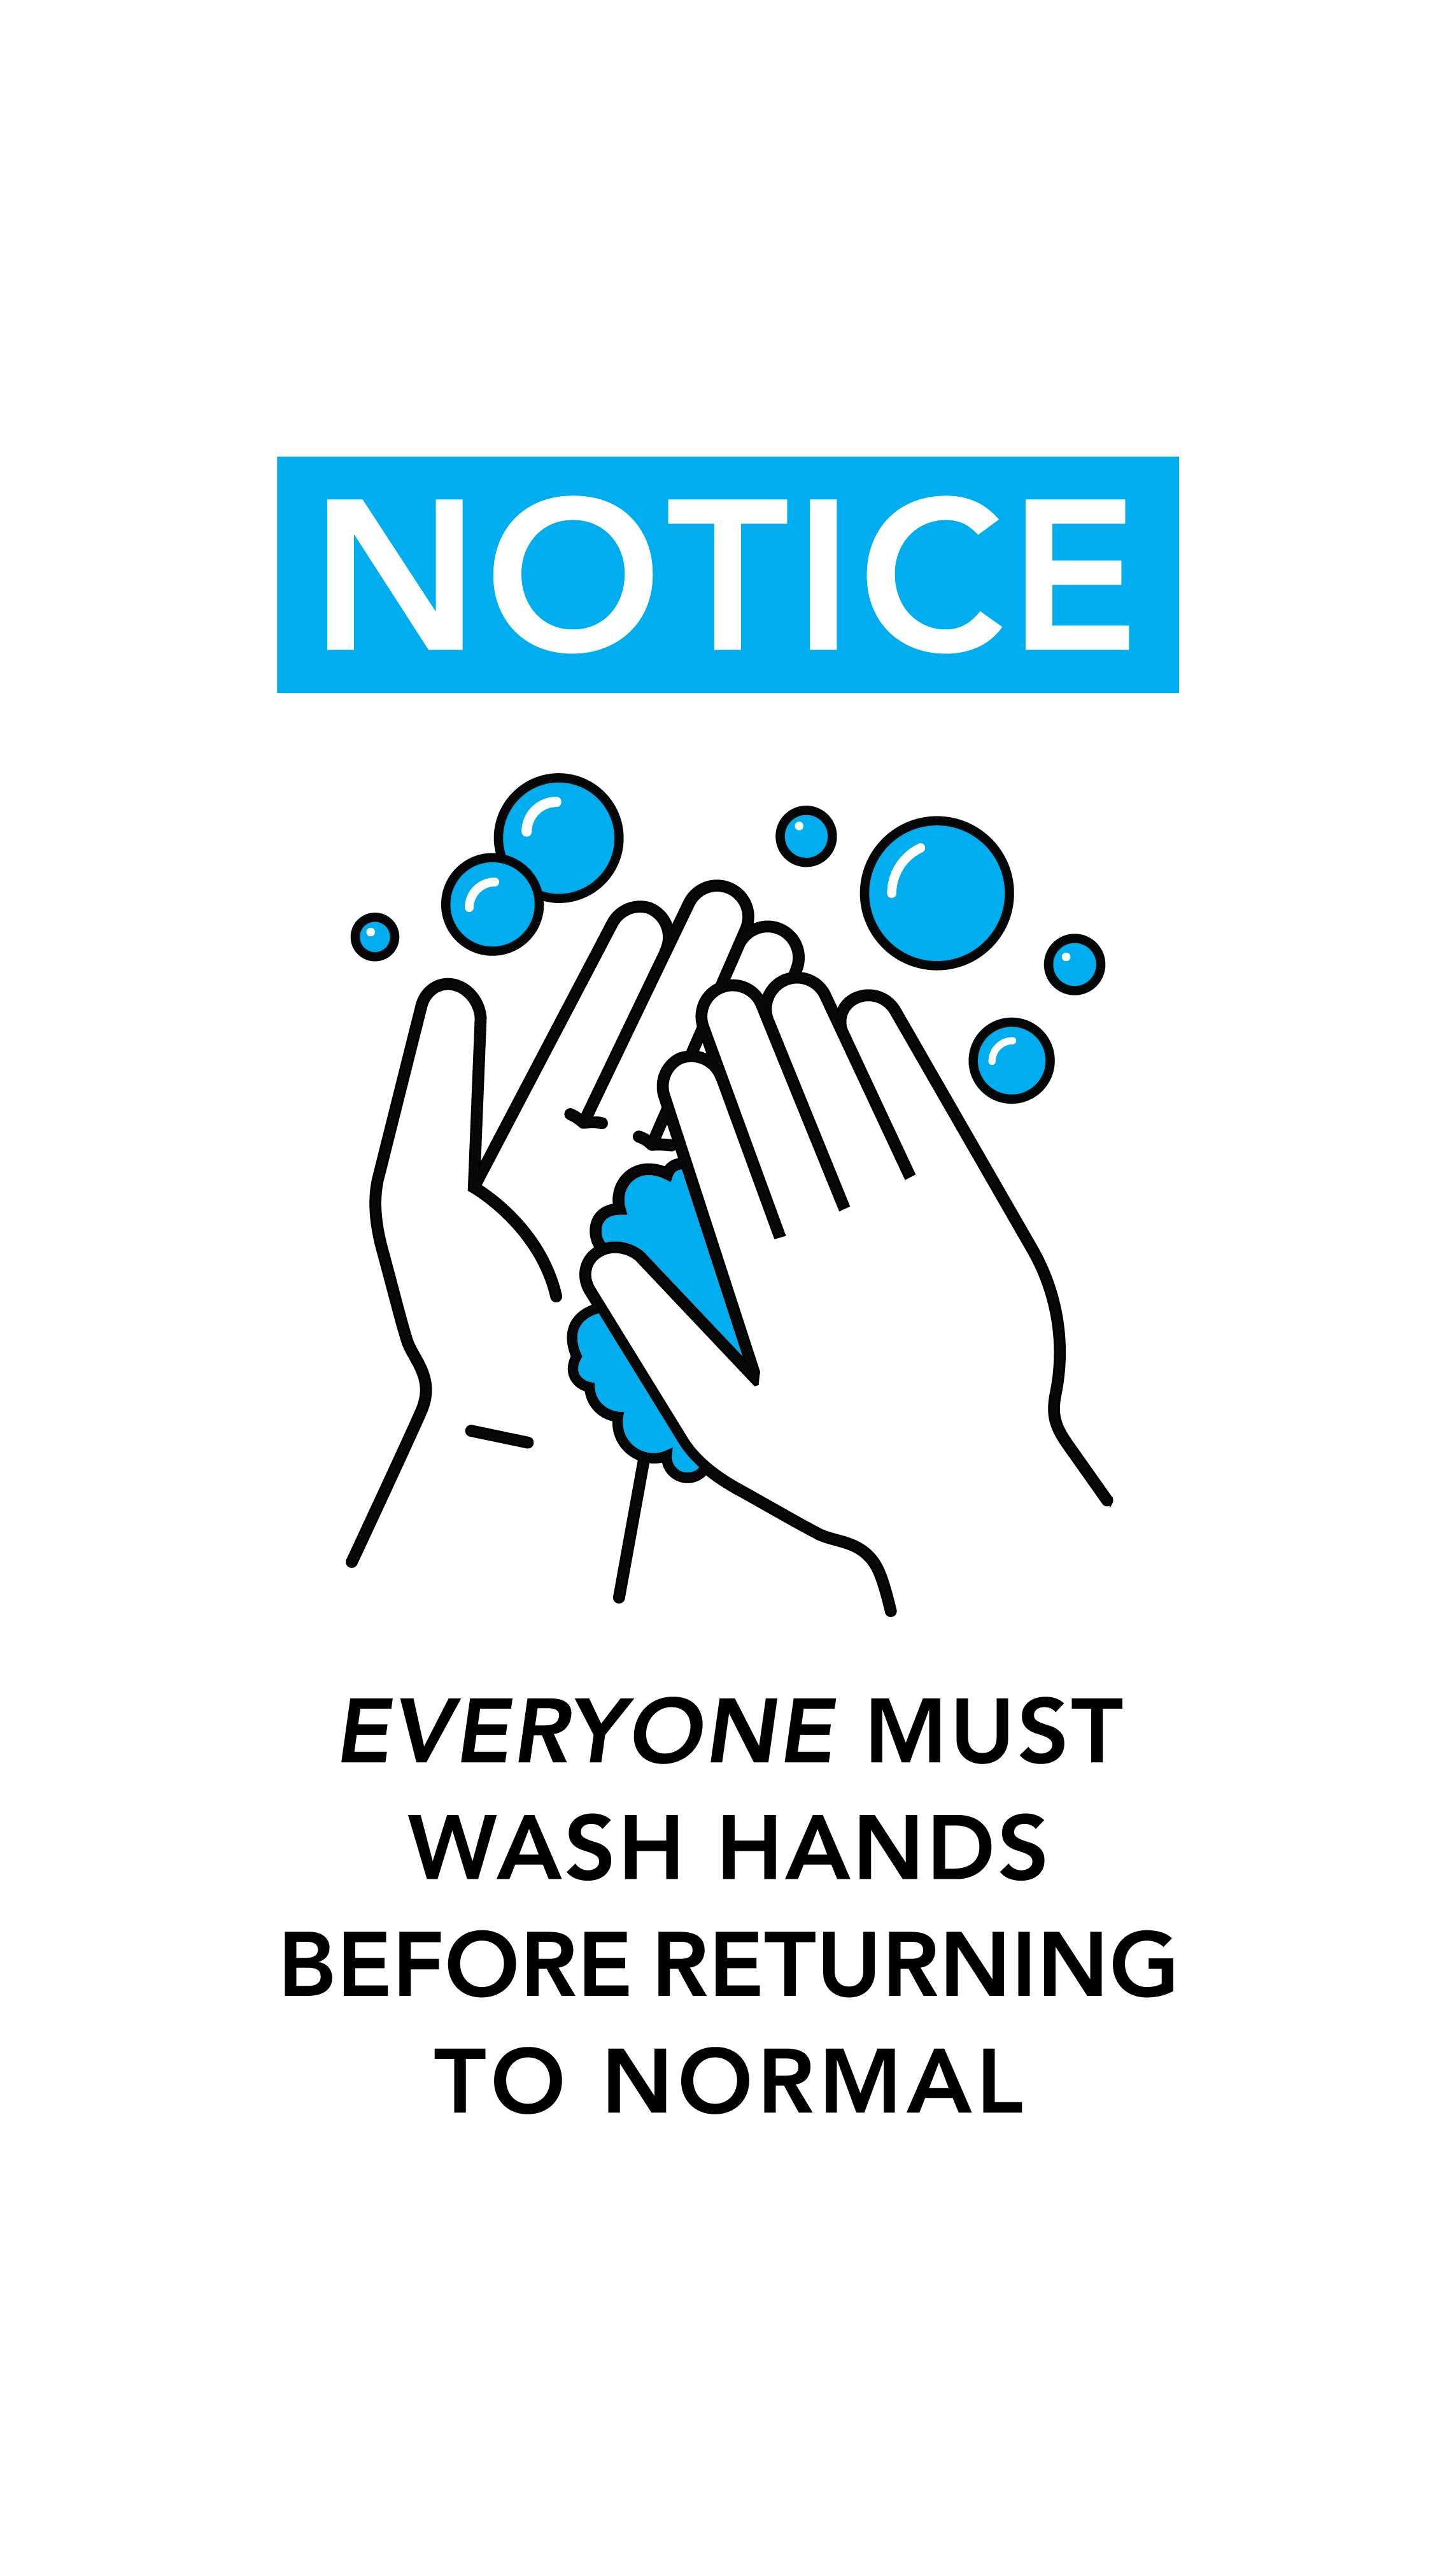 Notice everyone must wash hands before returning to normal